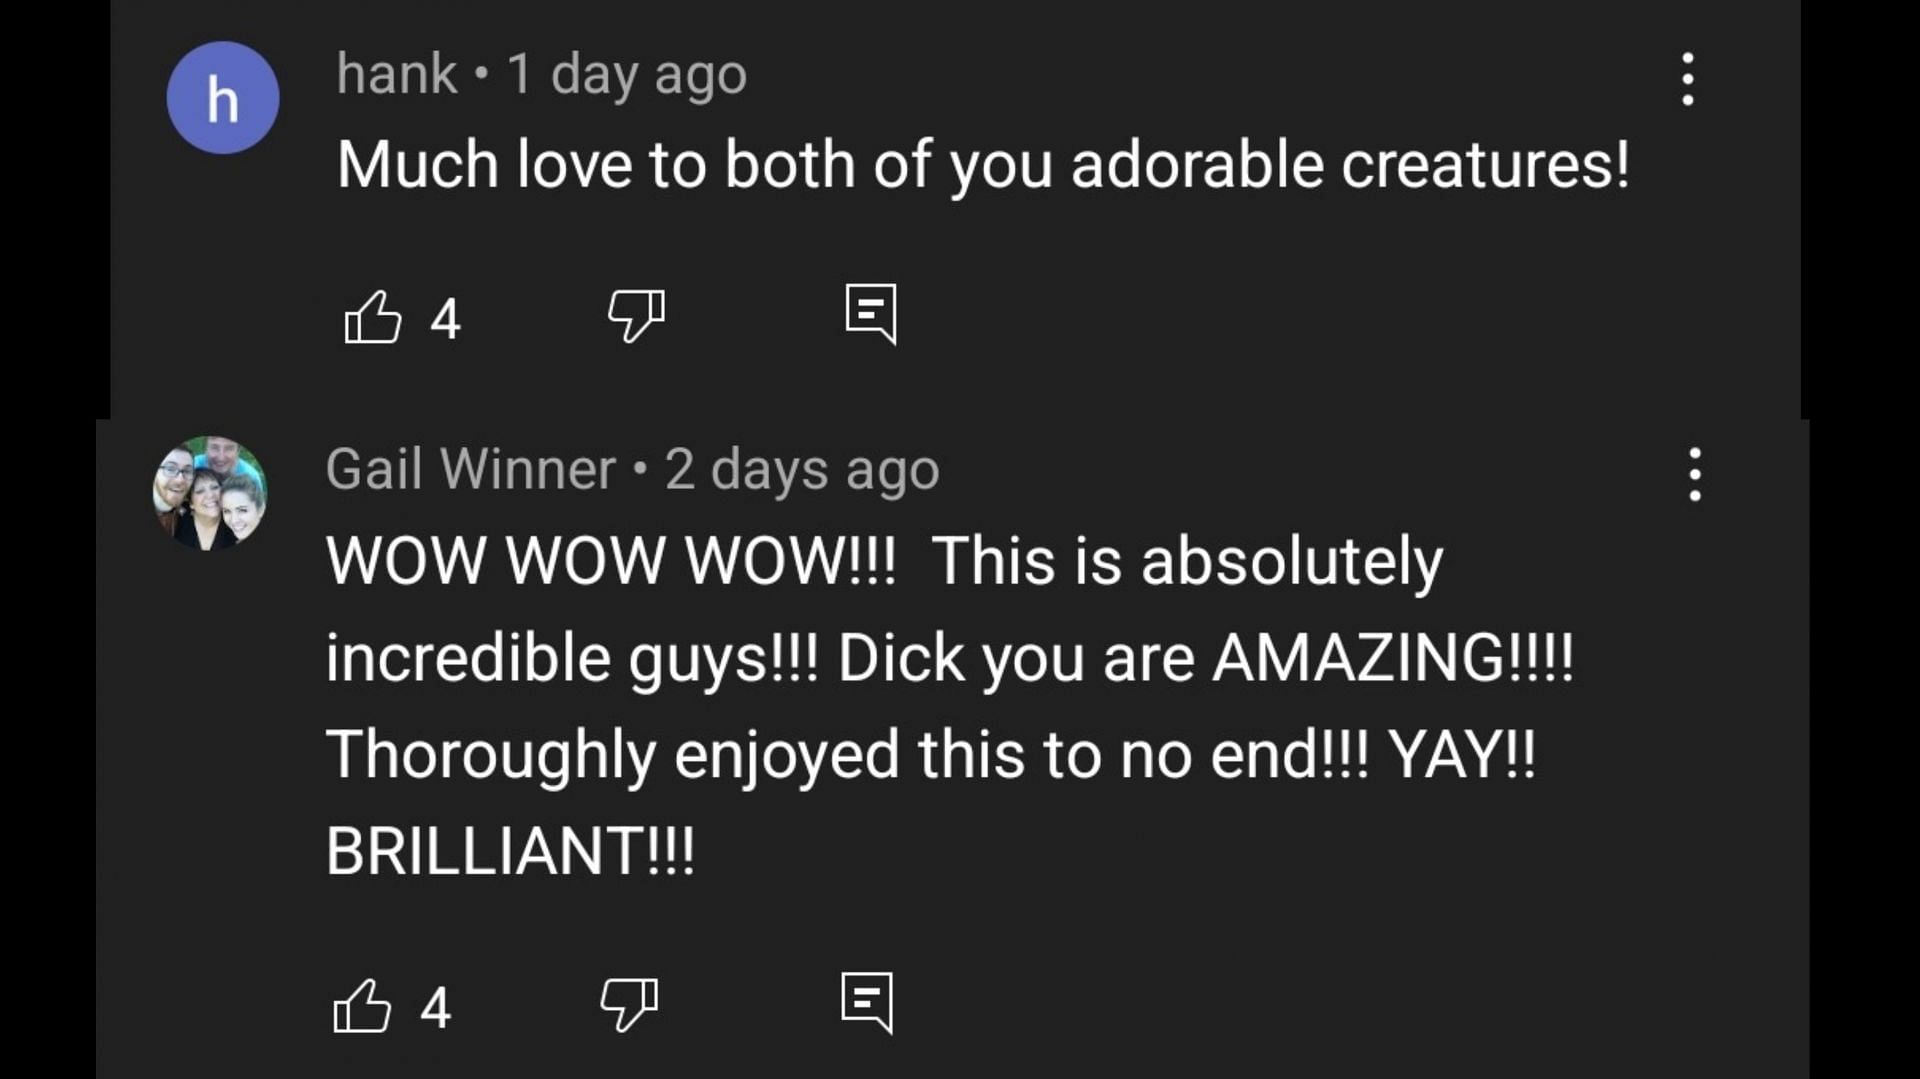 Comments on Van Dyke&#039;s YouTube video 6/7